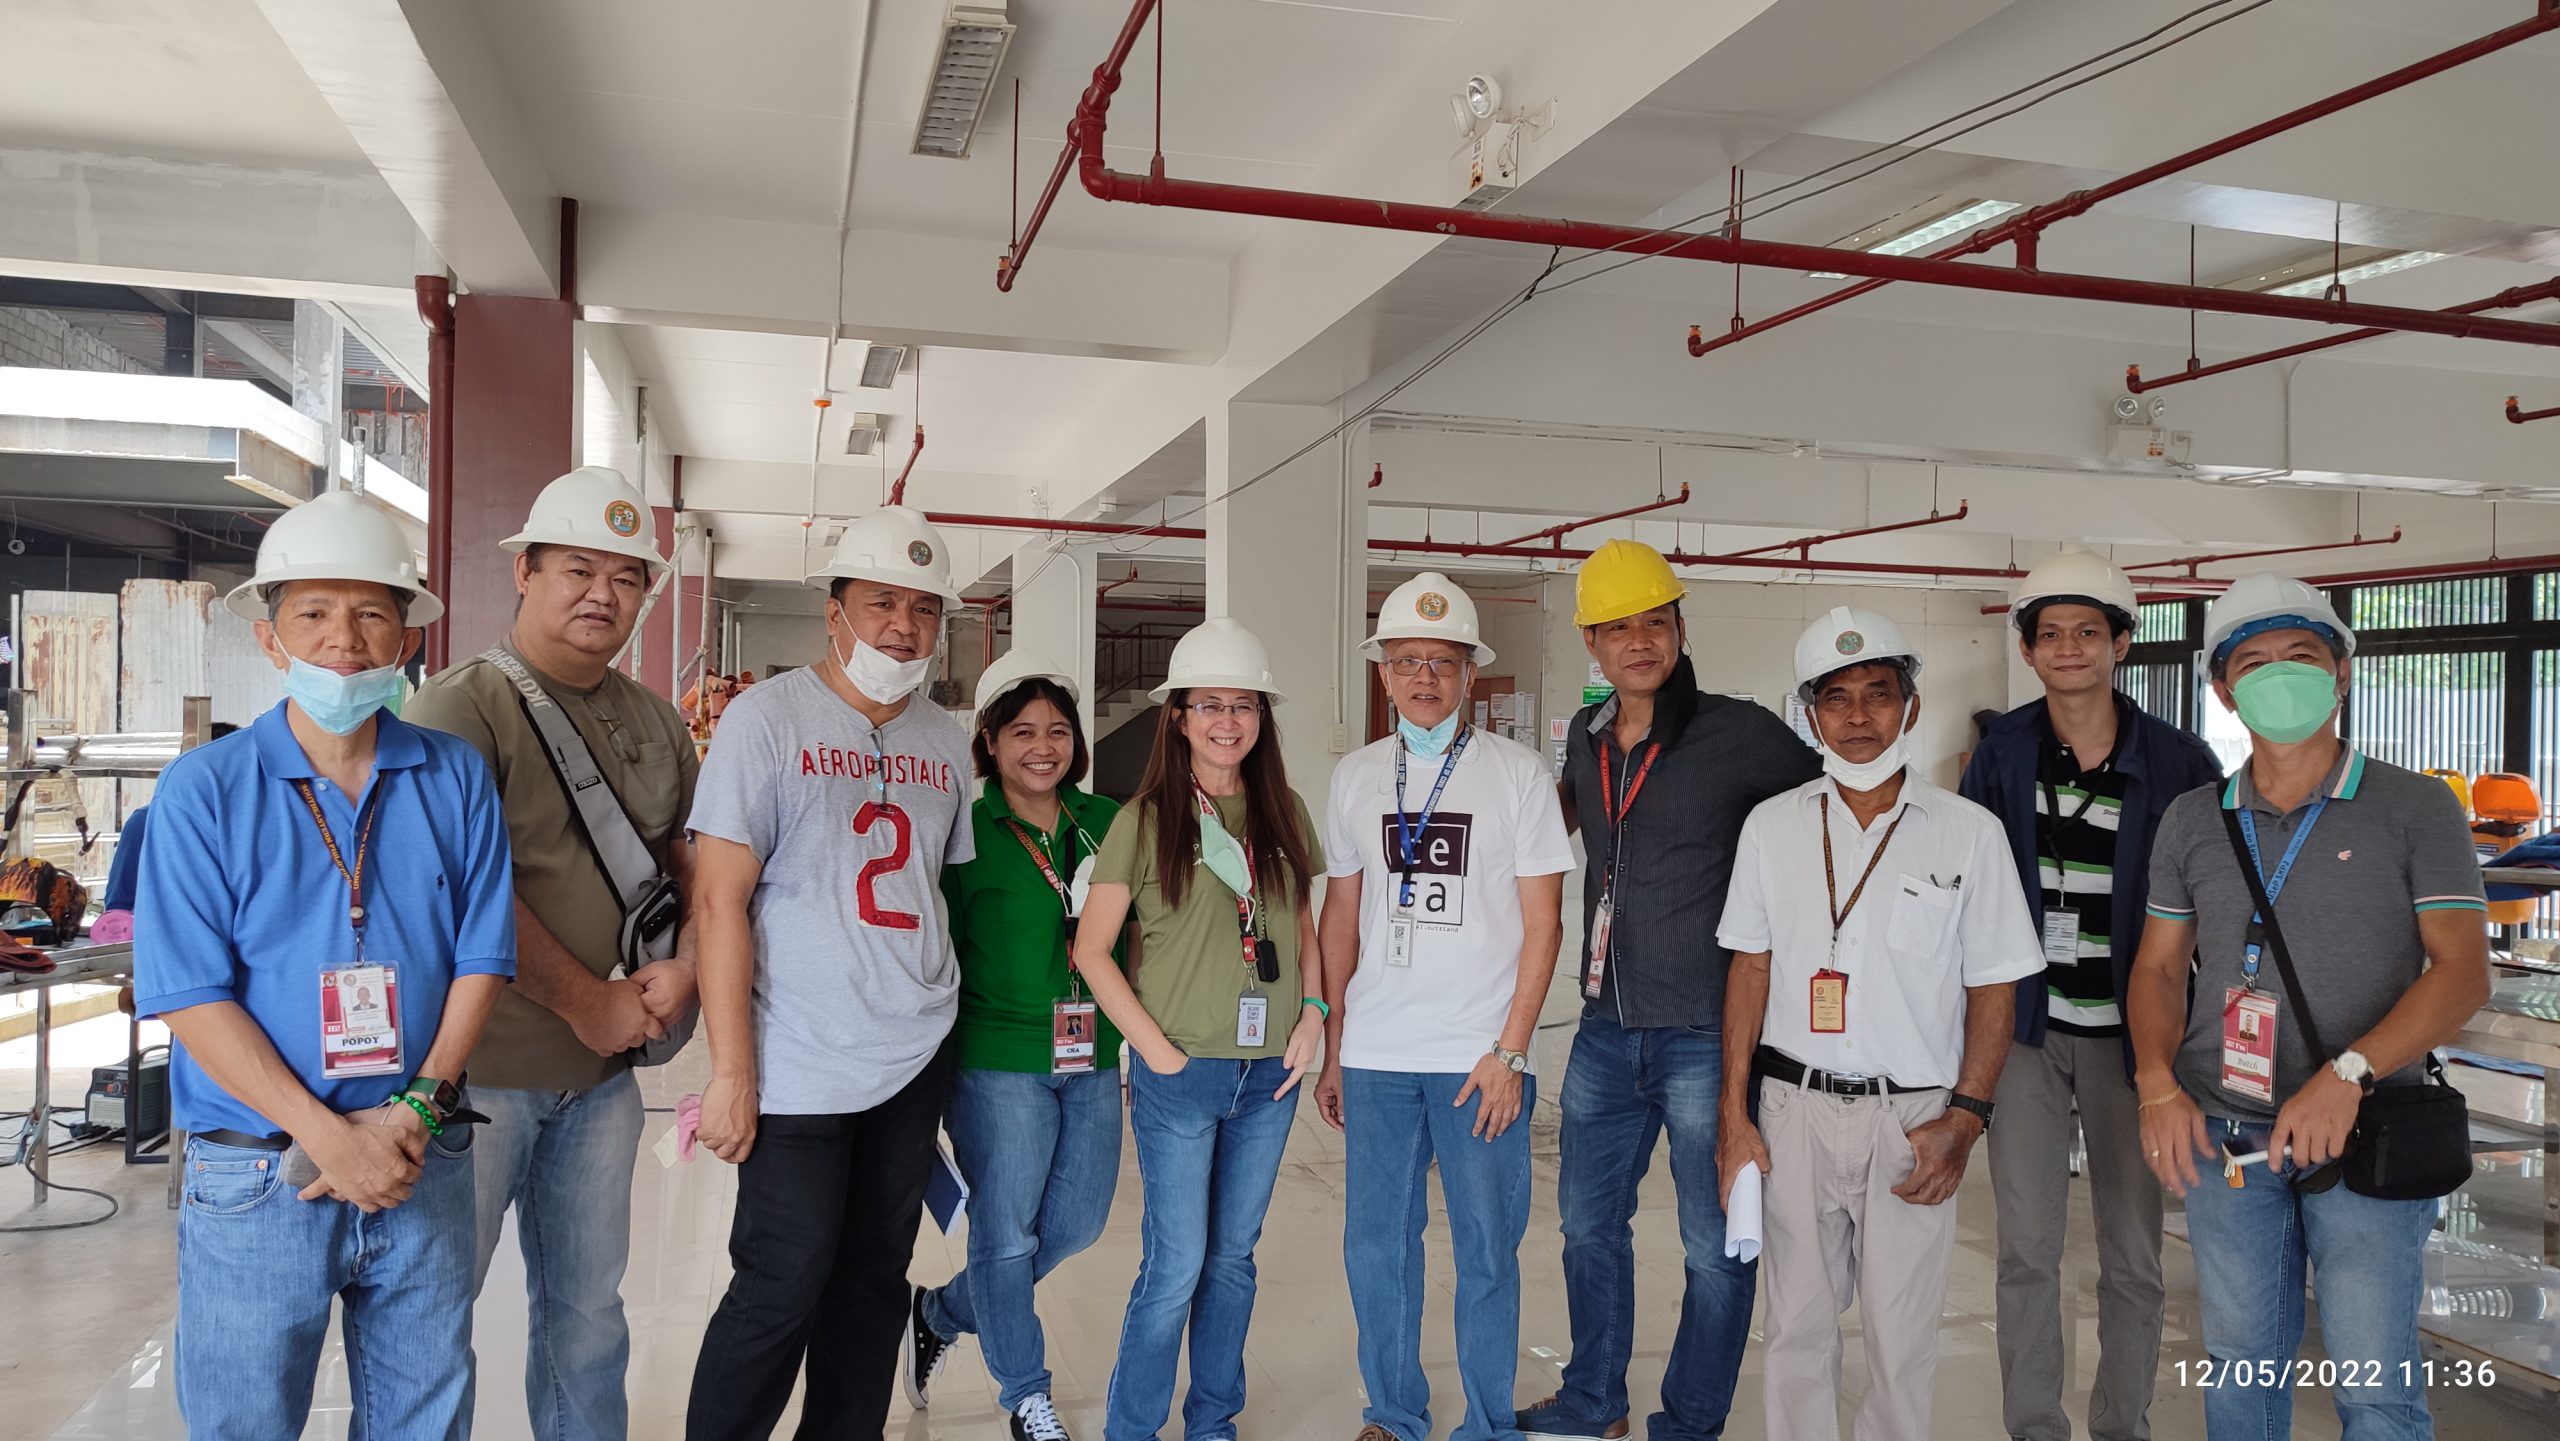 The Infrastructure Committee of USeP conducted a Physical Inspection to the ongoing construction of the T.L.E. Building on May 12, 2022.